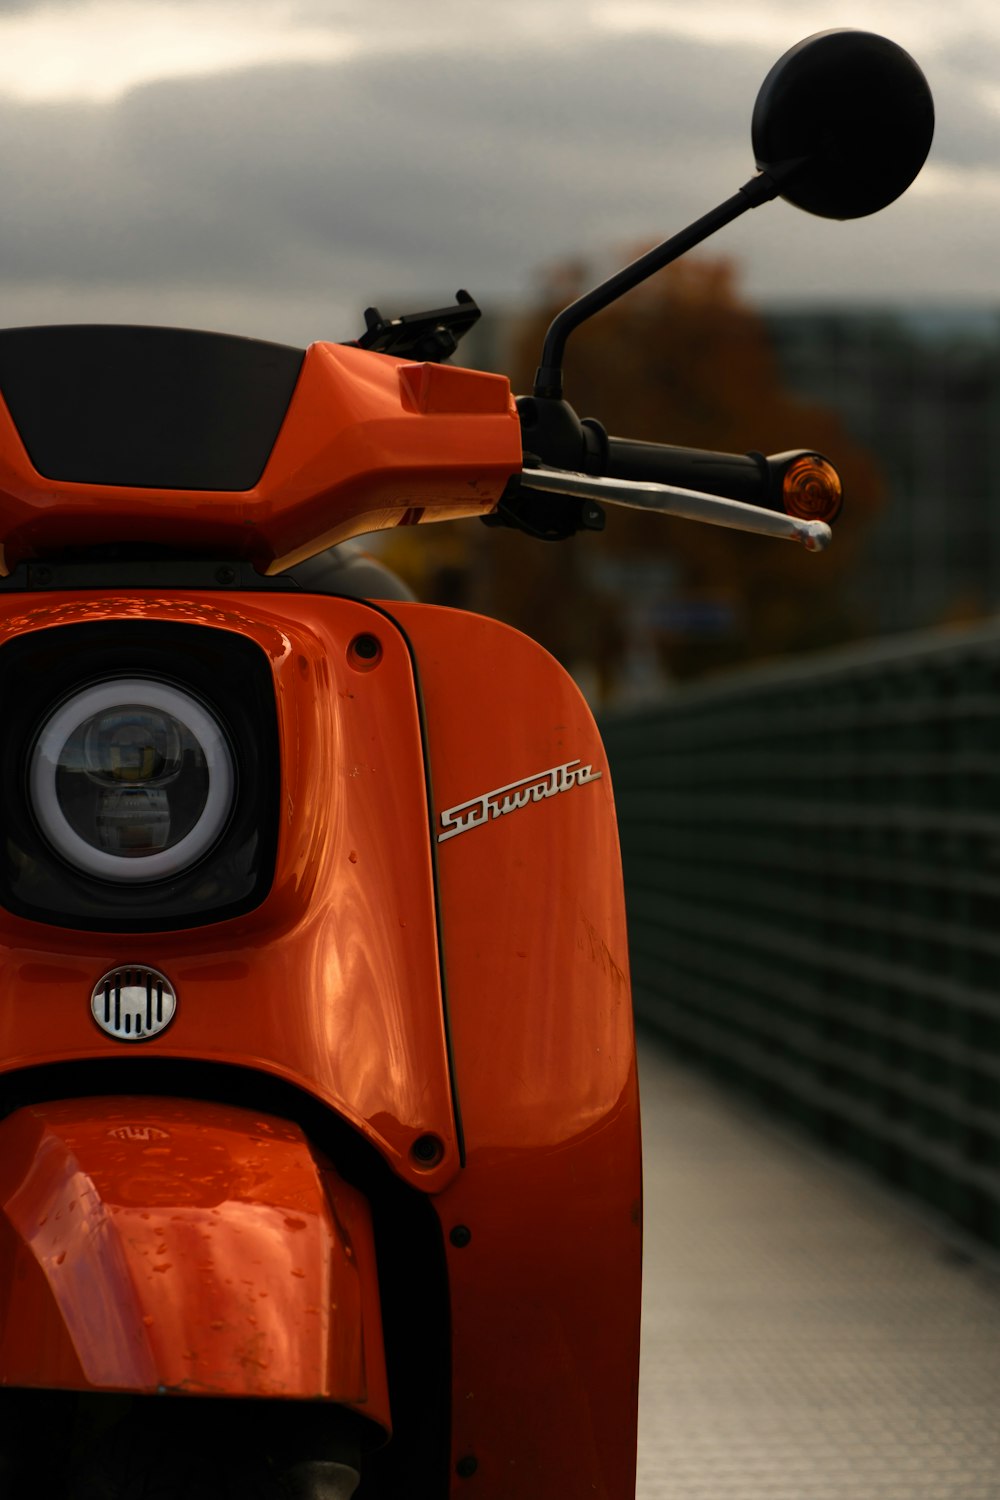 orange and black motorcycle in close up photography